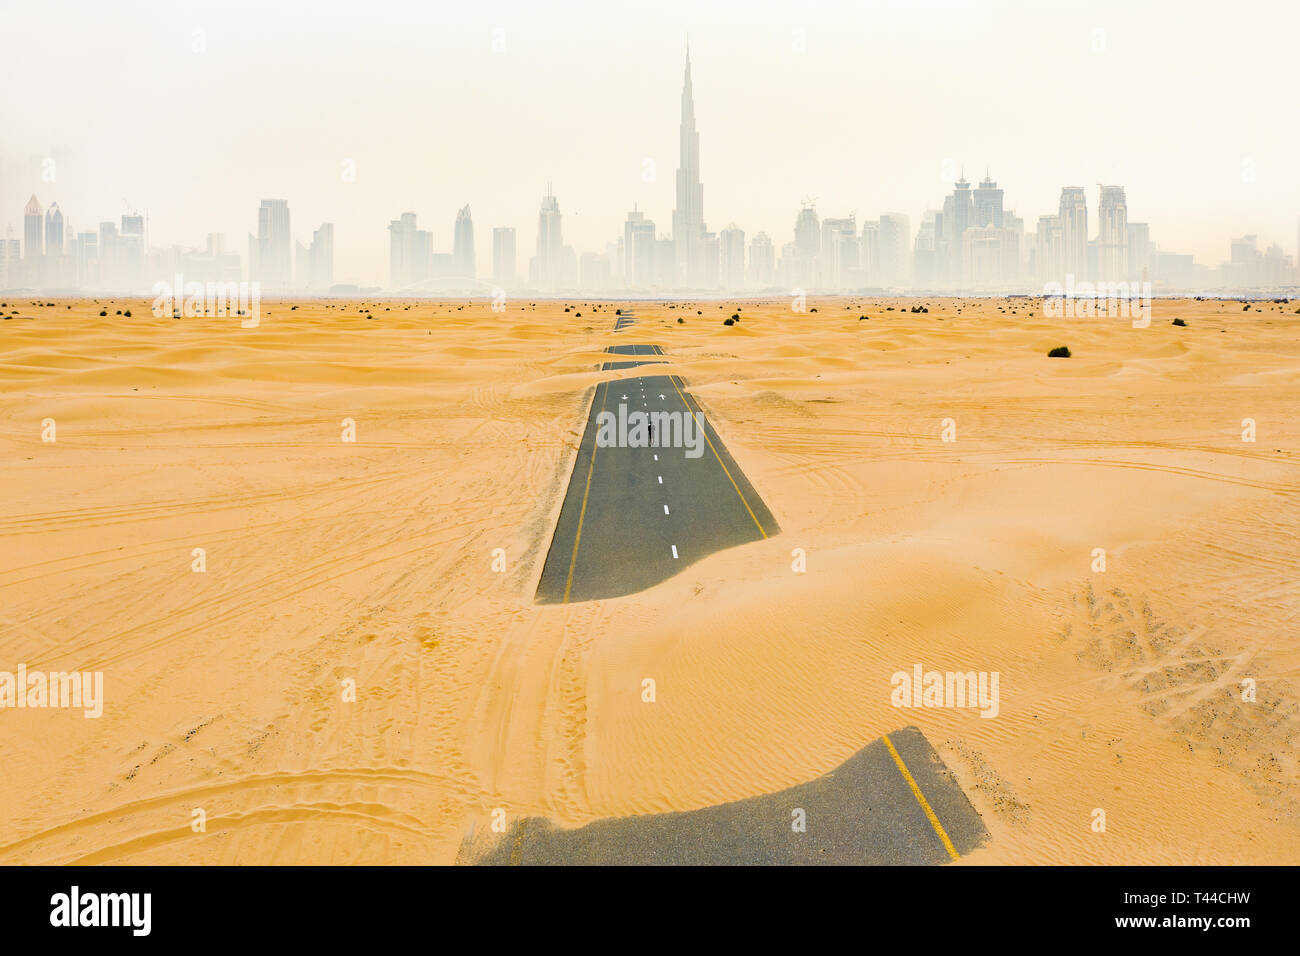 Stunning aerial view of an unidentified person walking on a deserted road covered by sand dunes in Dubai desert. Dubai skyline surrounded by fog Stock Photo